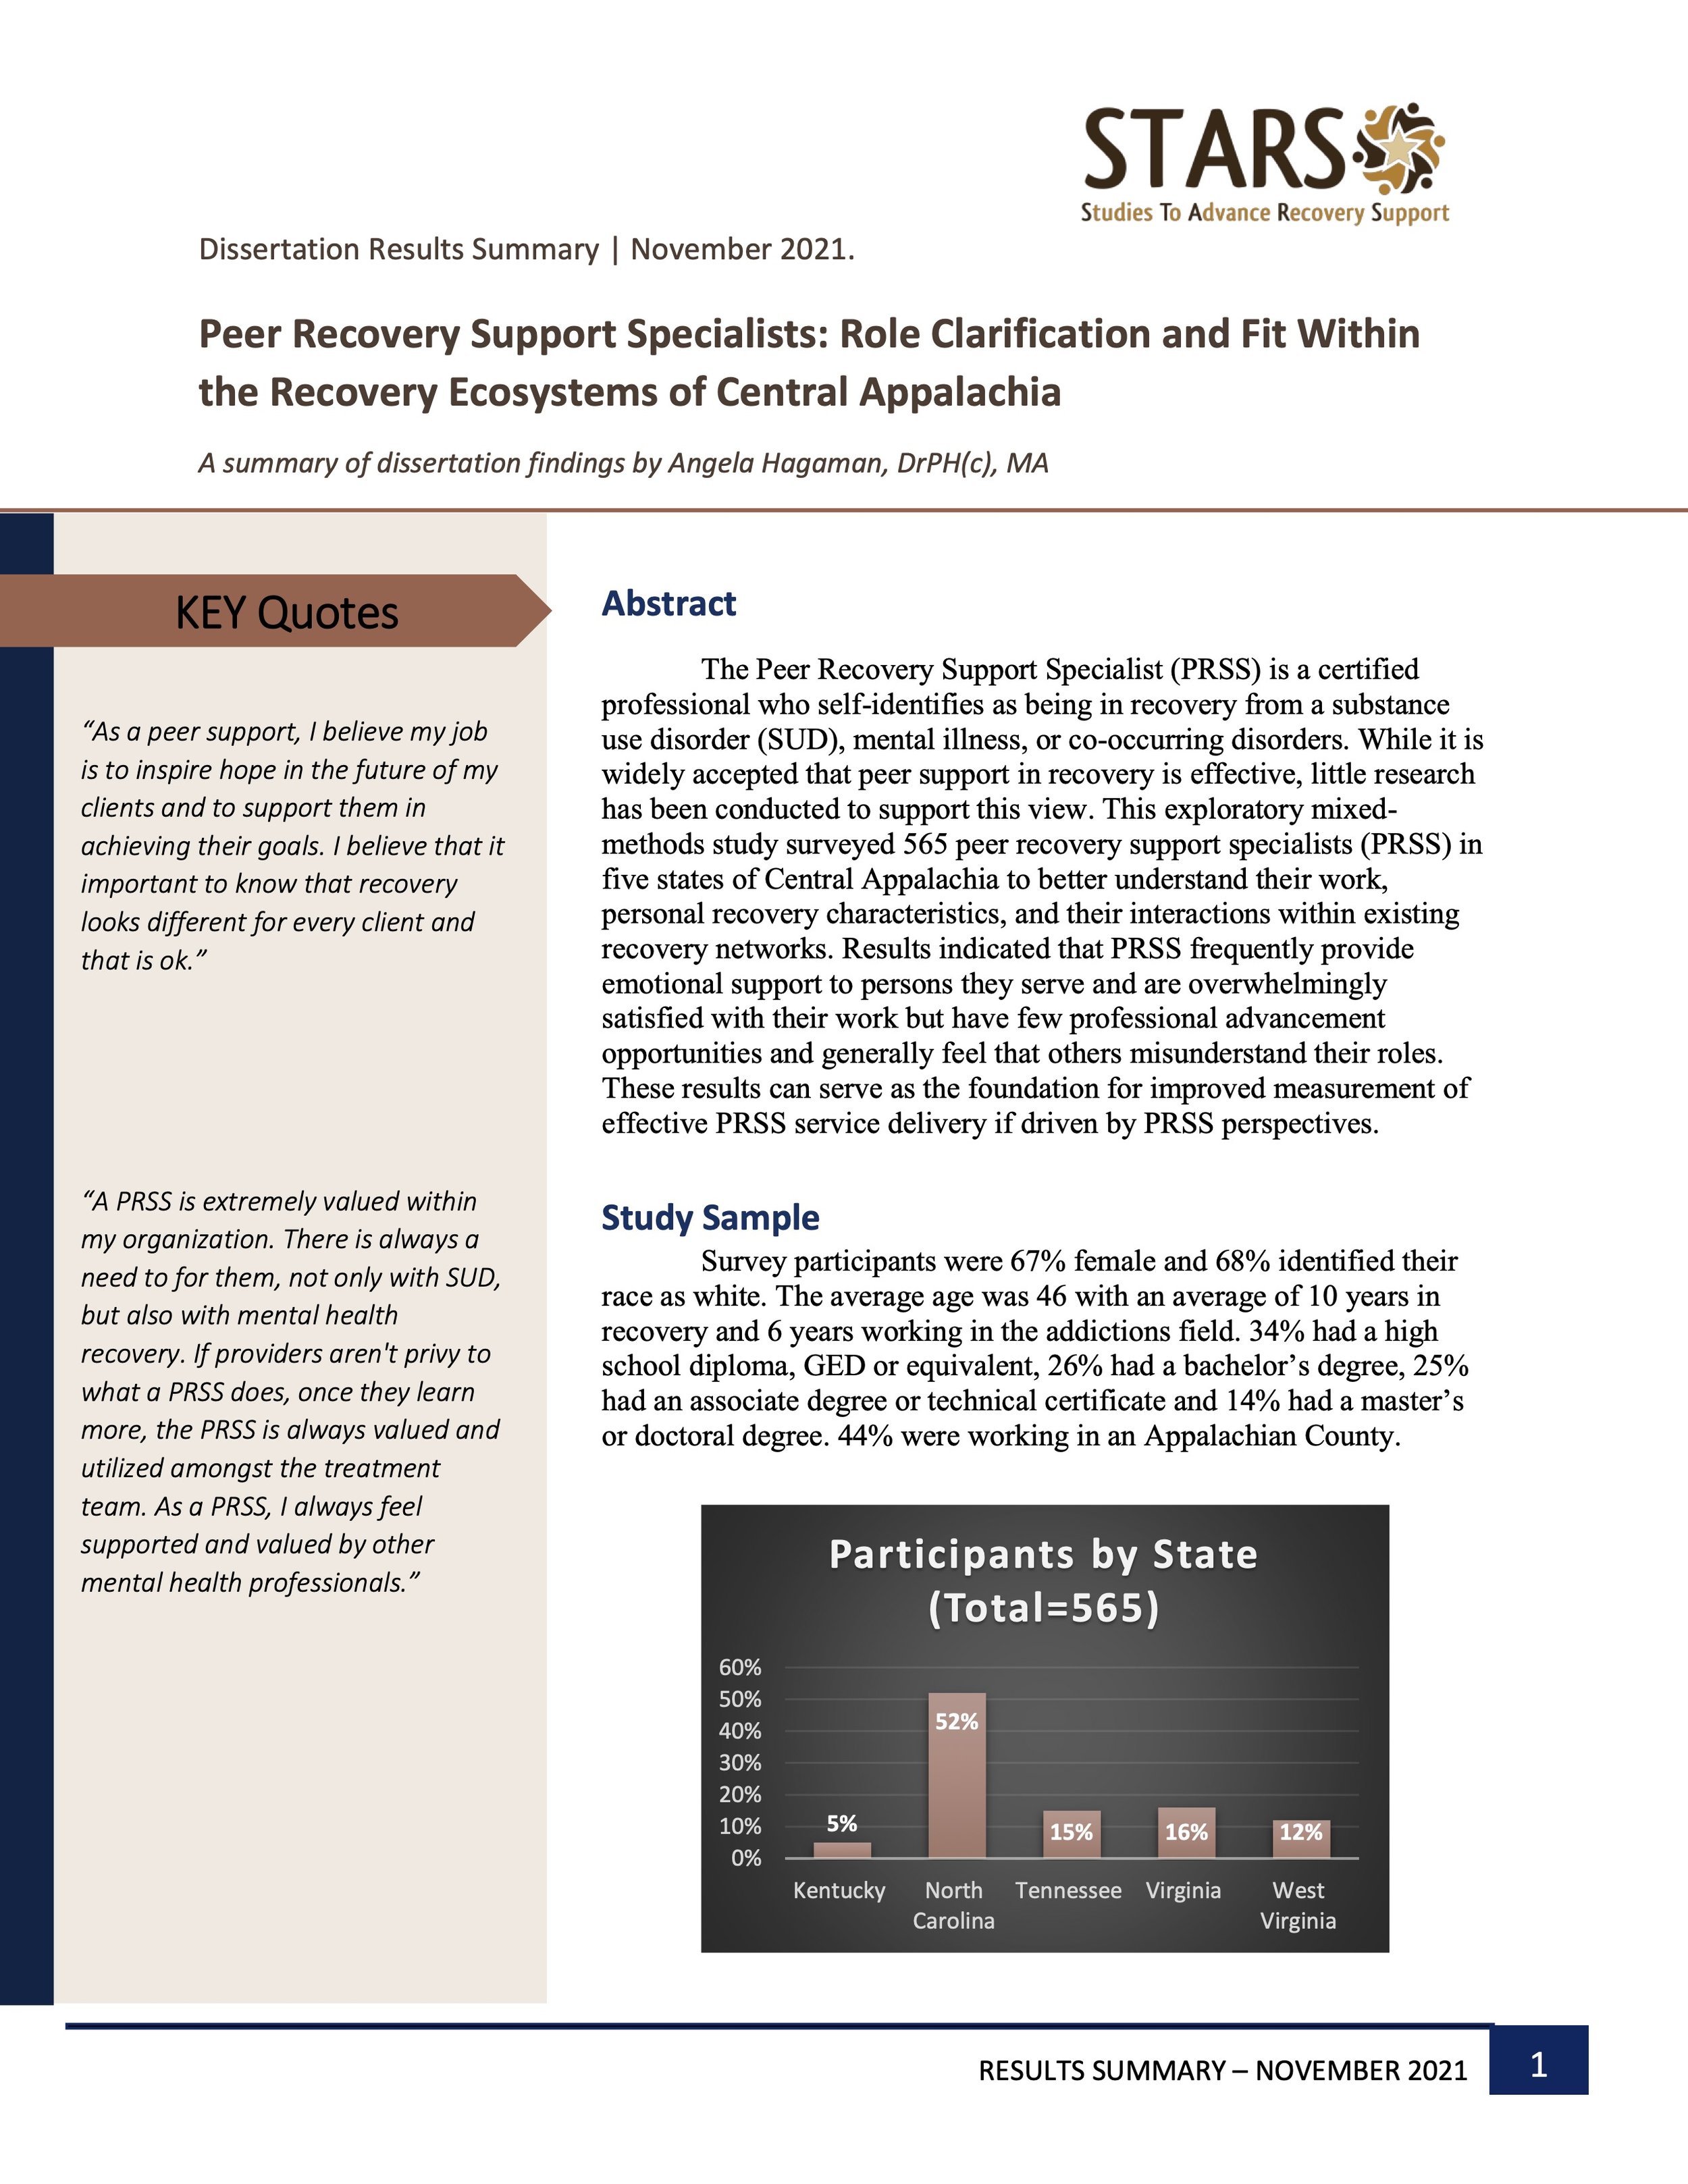 Peer Recovery Support Specialists- Role Clarification and Fit Within the Recovery Ecosystems of Central Appalachia.jpg